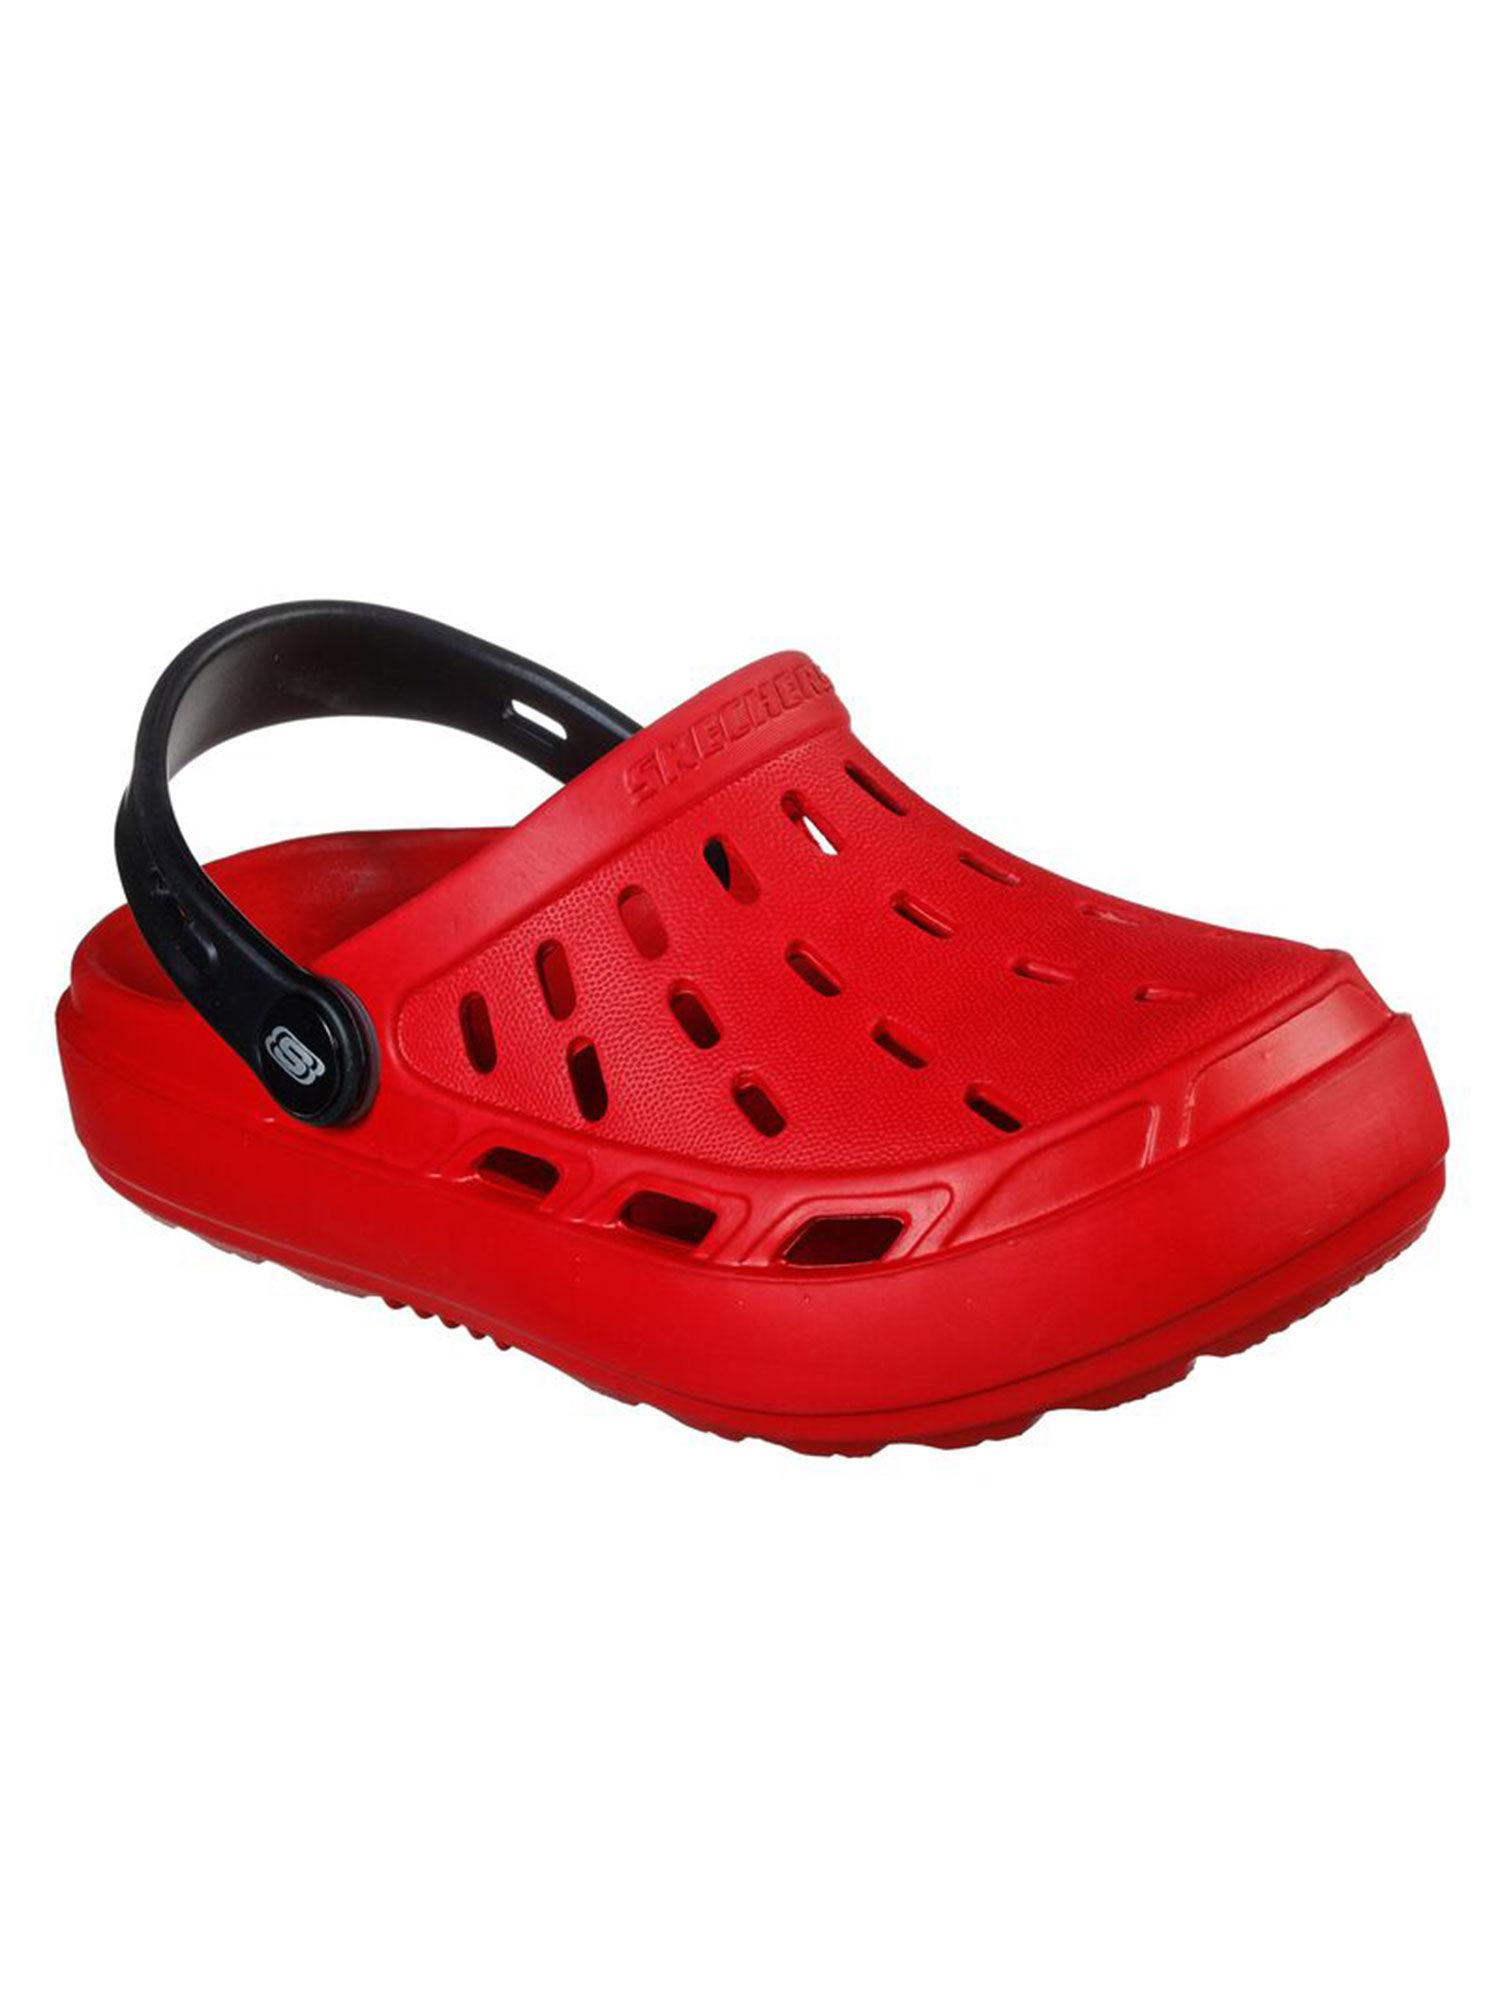 boys swifters red clogs